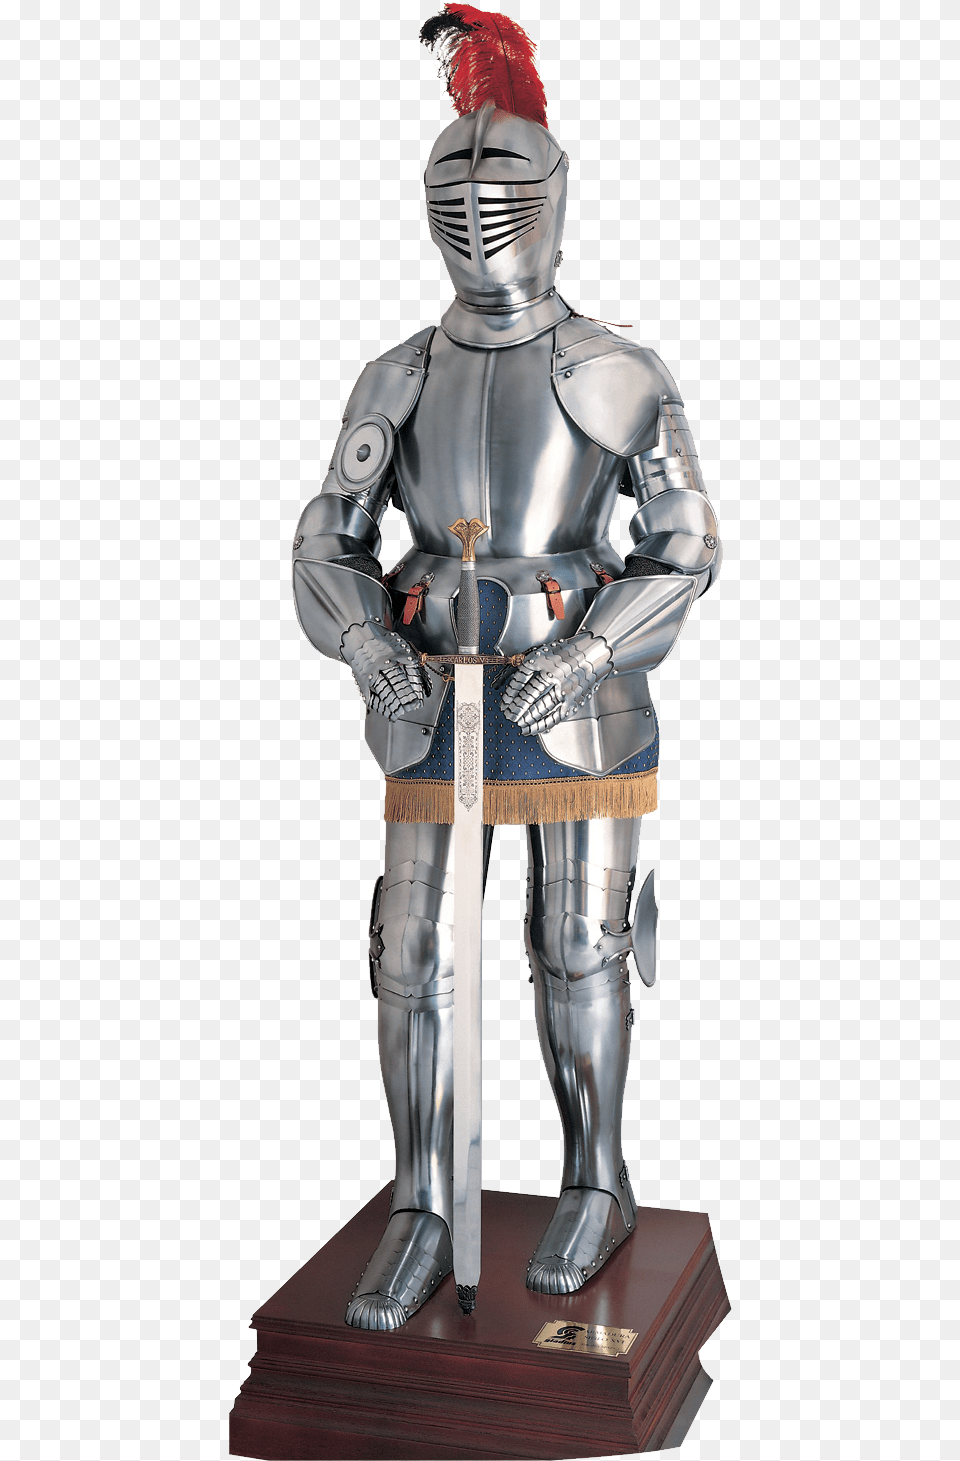 Armor, Adult, Male, Man Png Image